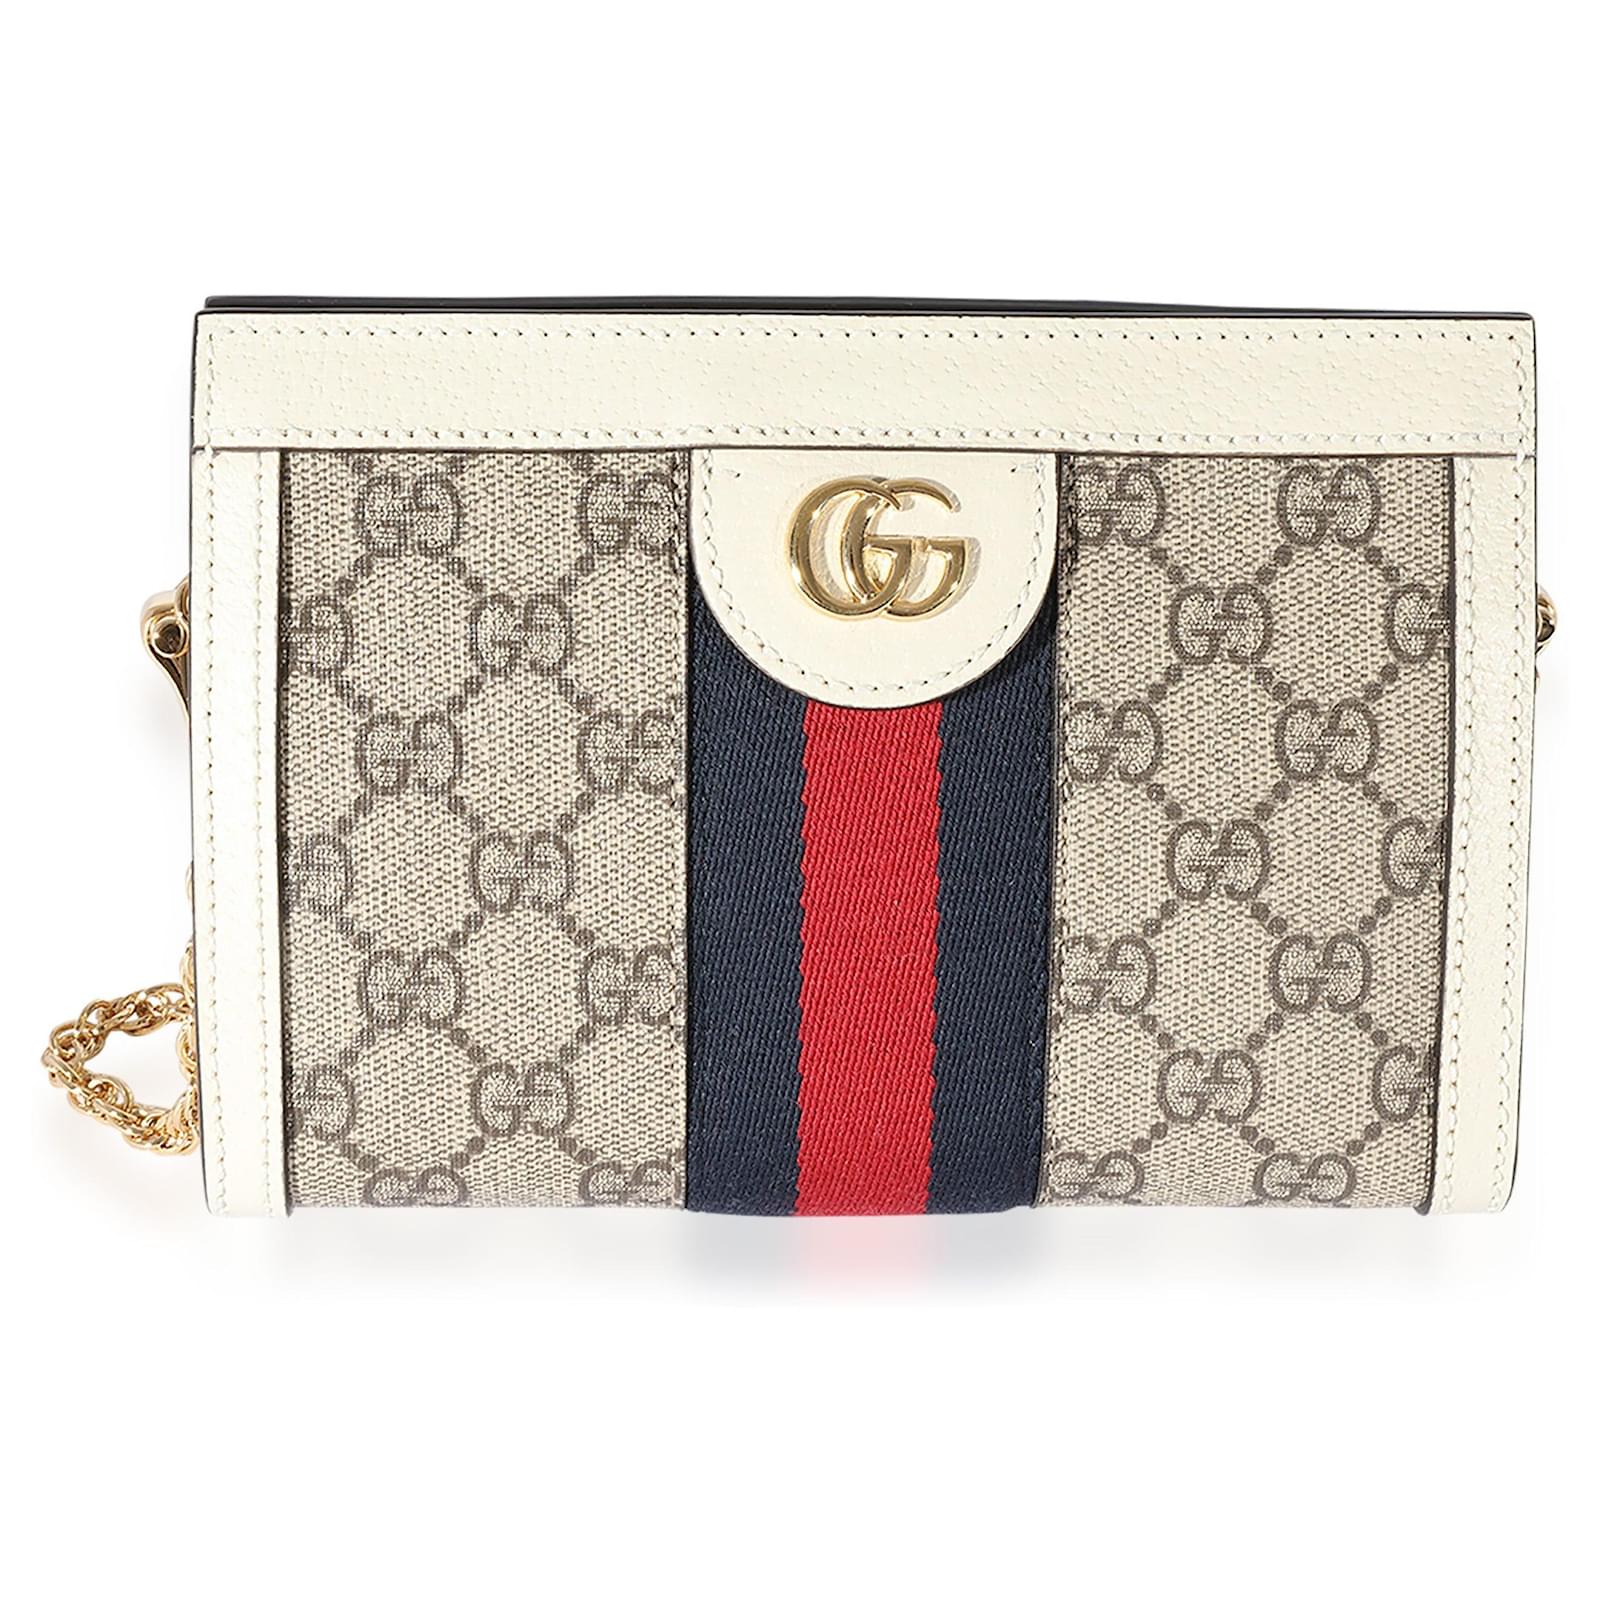 Gucci Off-White Leather Small Web Ophidia GG Shoulder Bag Gucci